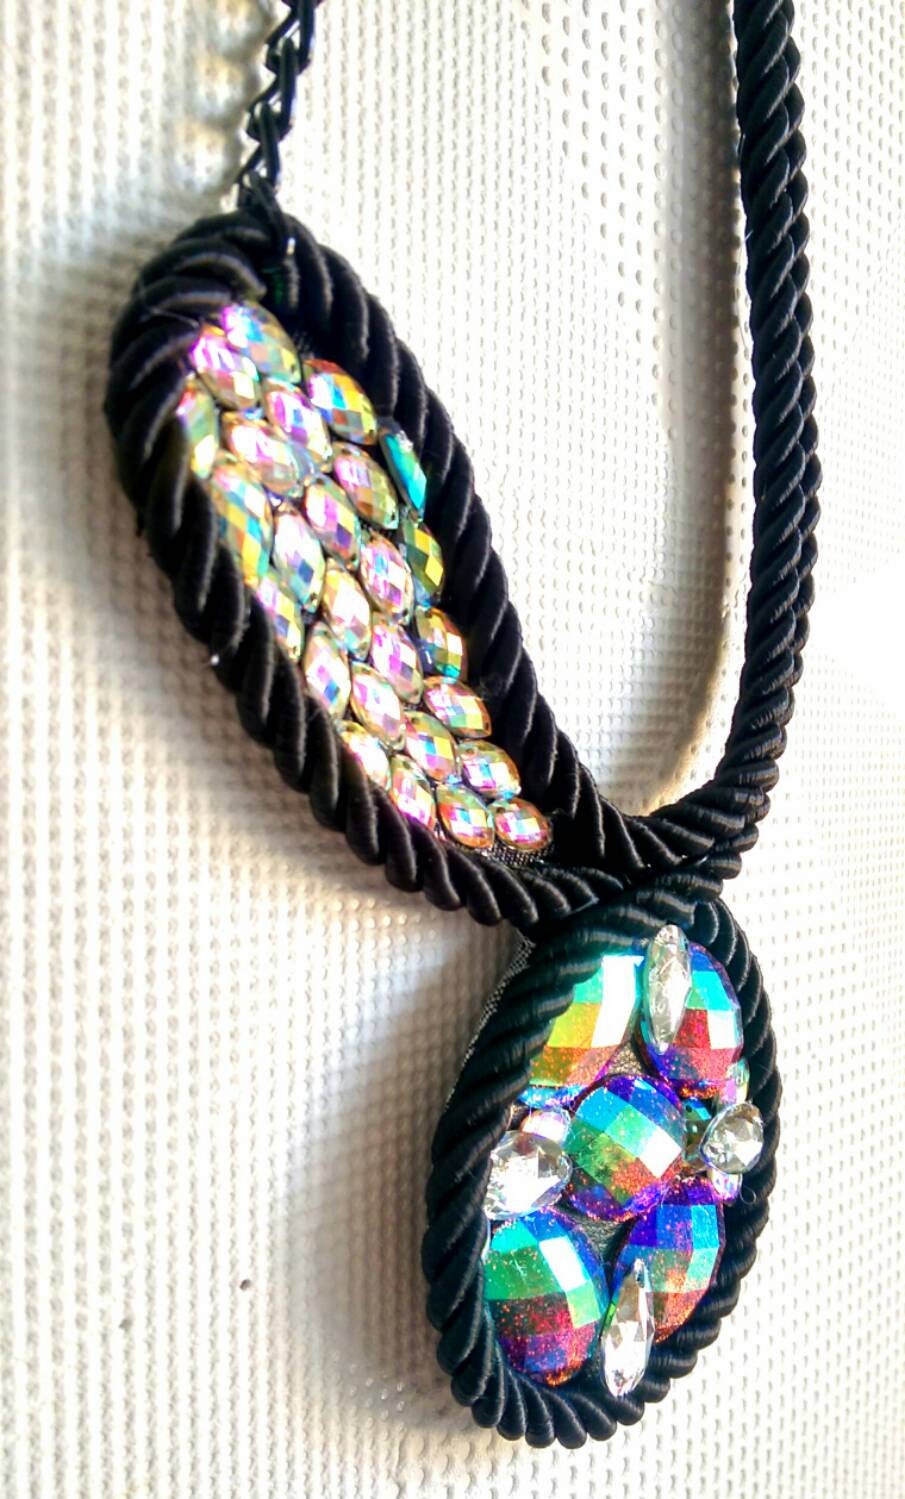 Black cord necklace Ab crystal necklace by SaraKeyHandmade on Etsy